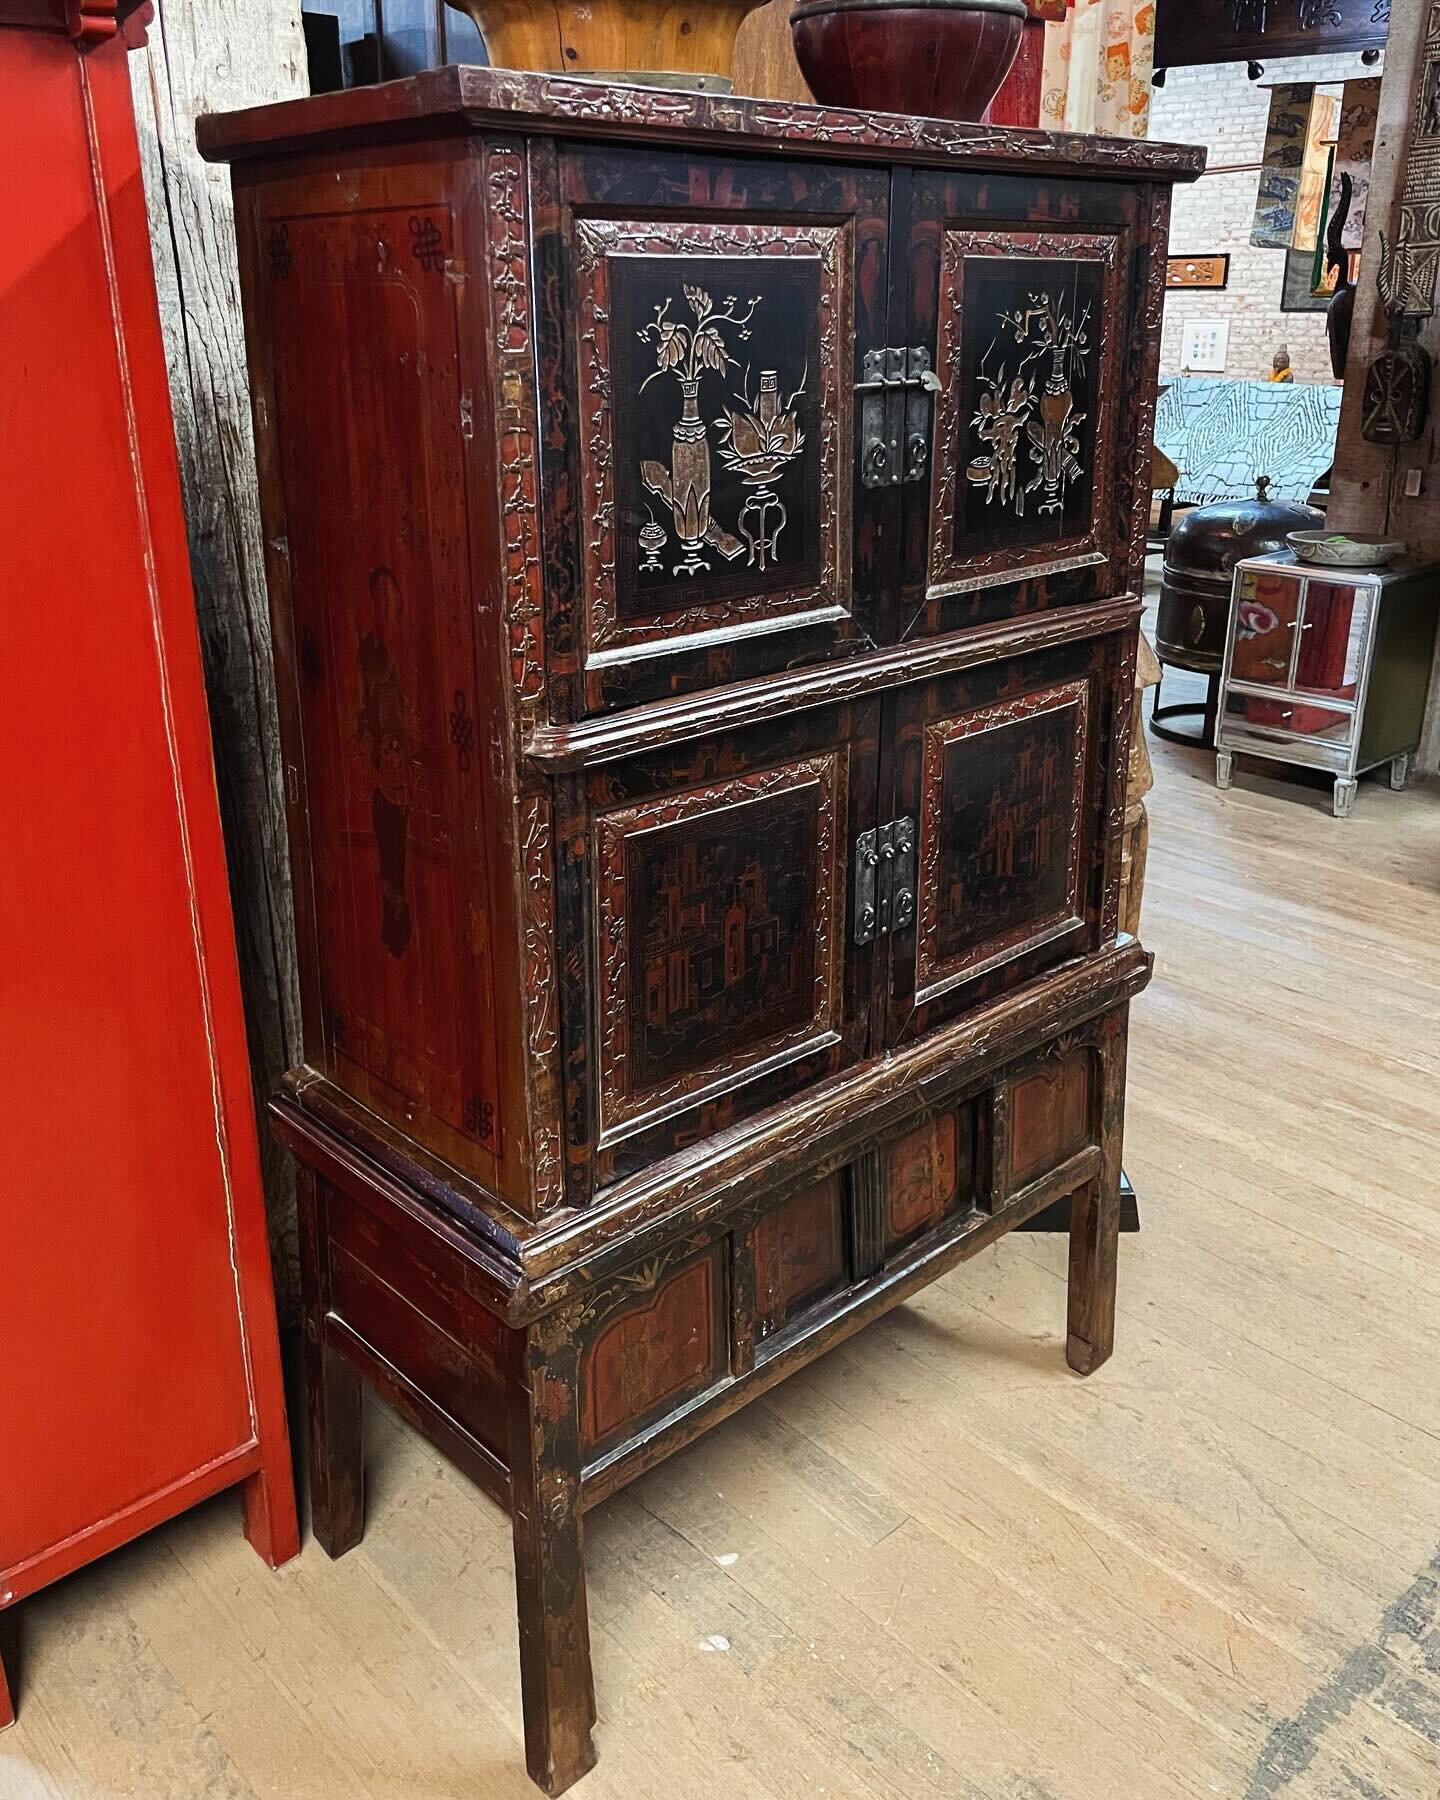 One of our favorites in the warehouse, and one of the oldest at almost 150 years.  The combination of intricate carving and hand painted details makes this truly a one of a kind piece.  All original hardware and with the original certificate of antiq